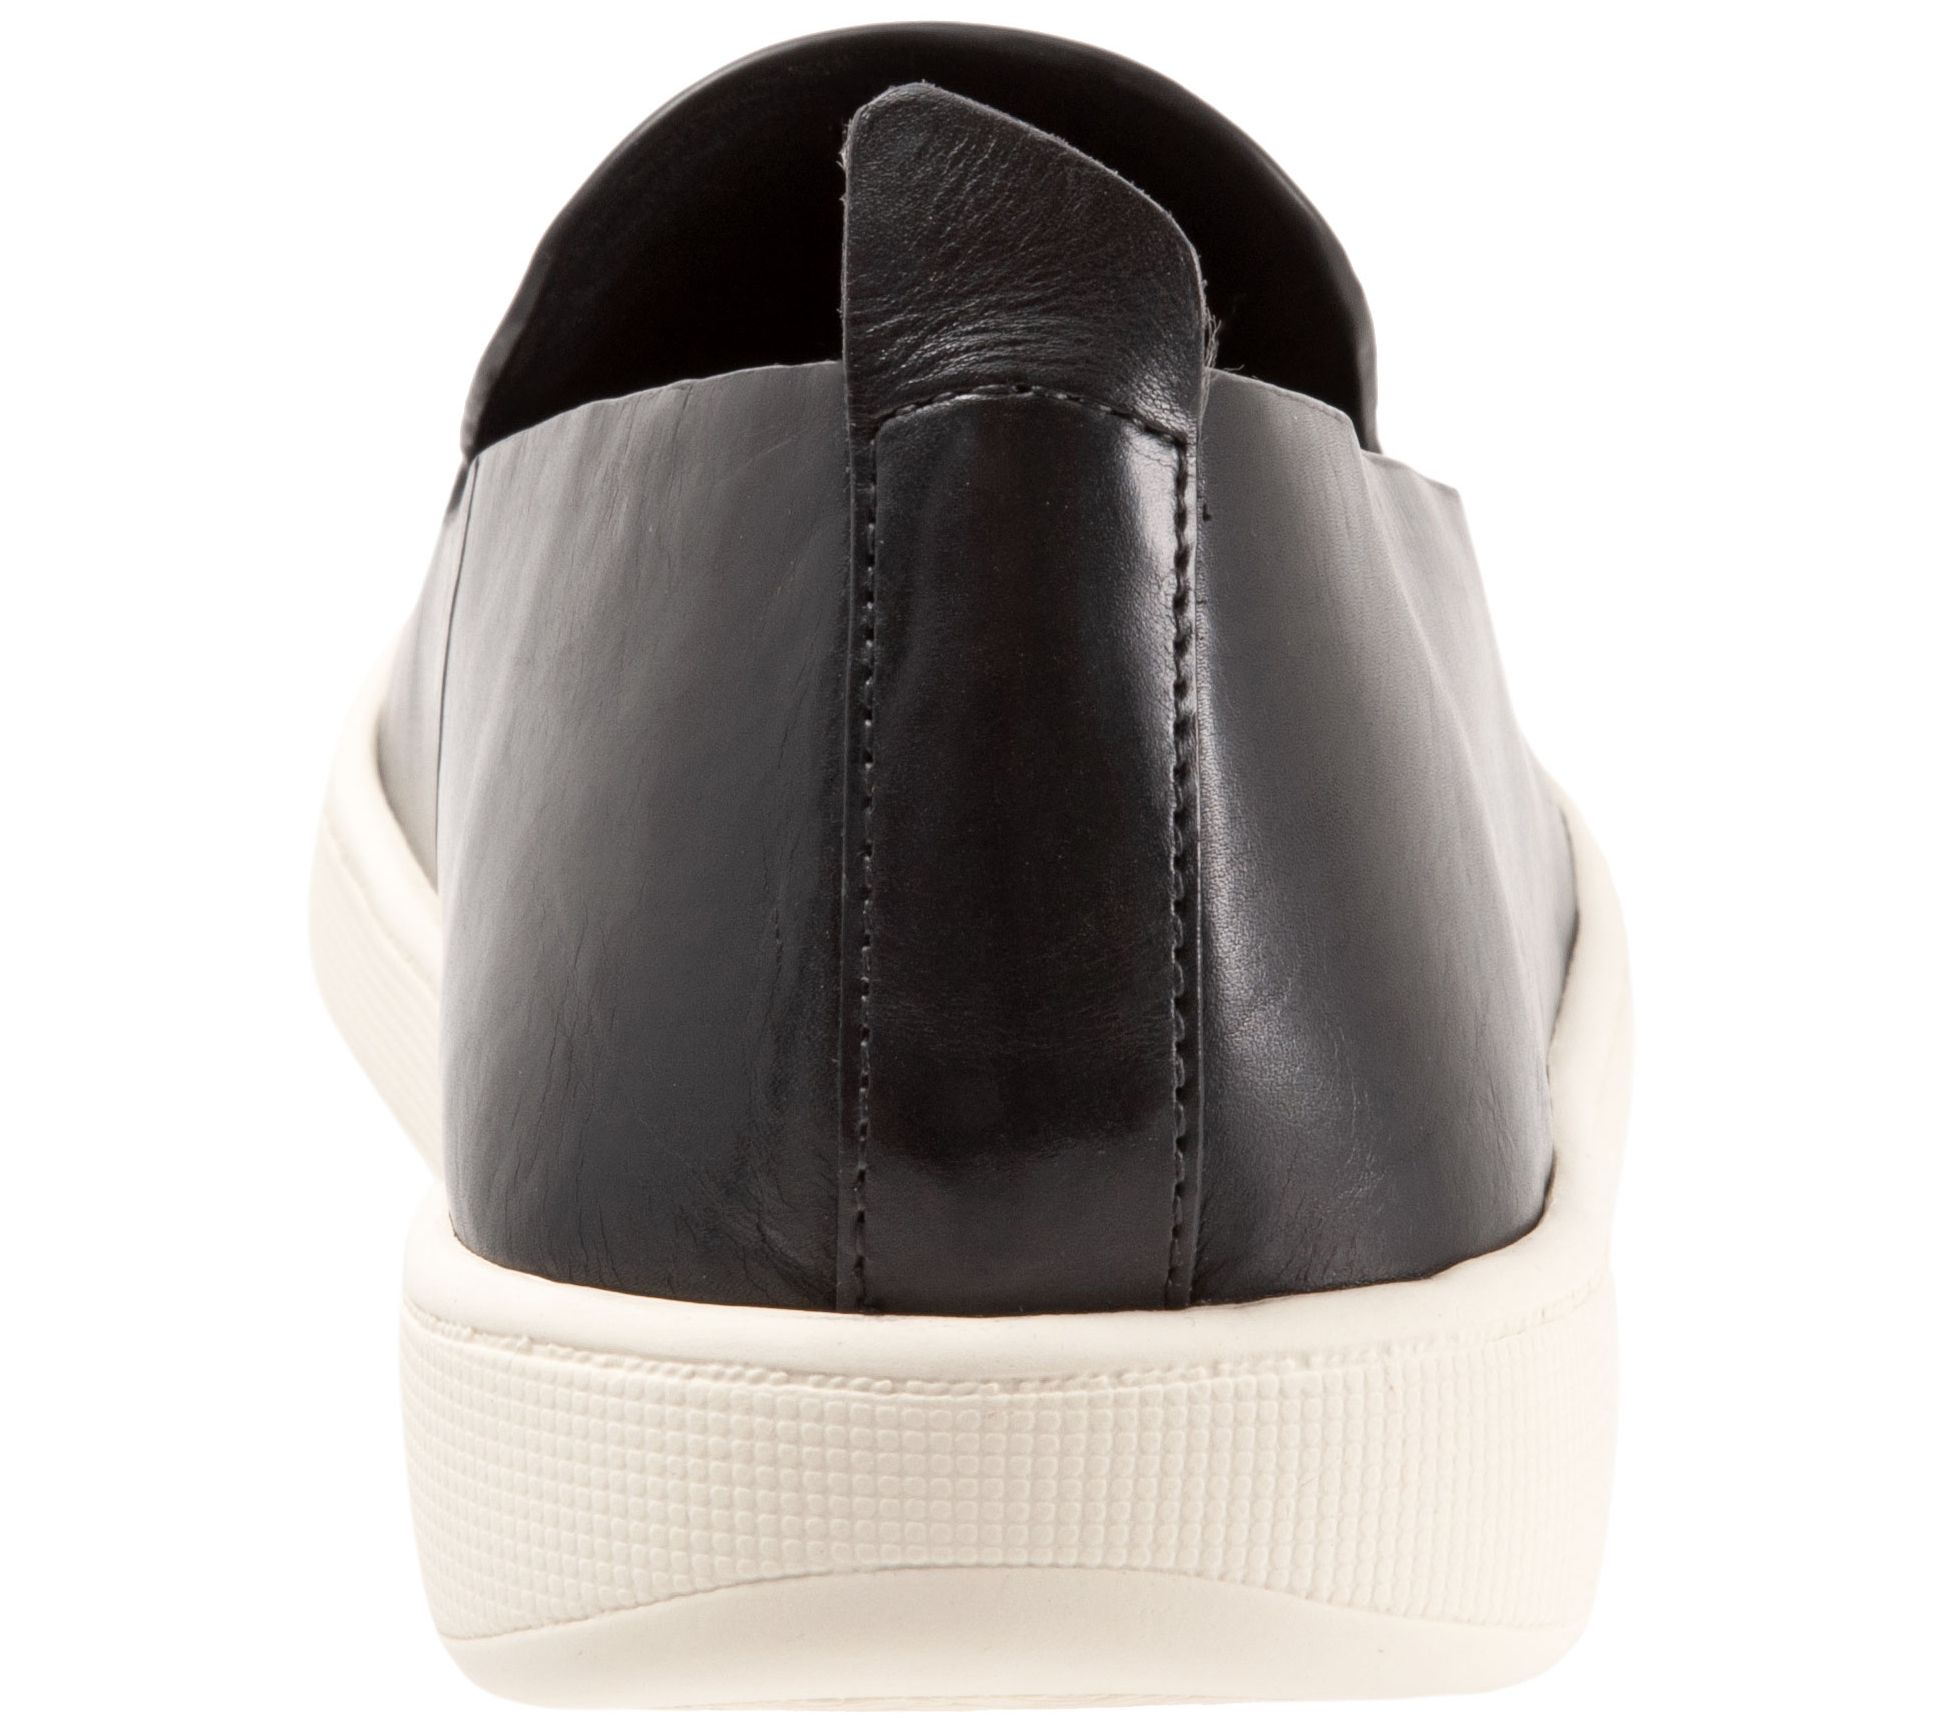 SAVA Slip-On Leather Loafers - Nell - QVC.com